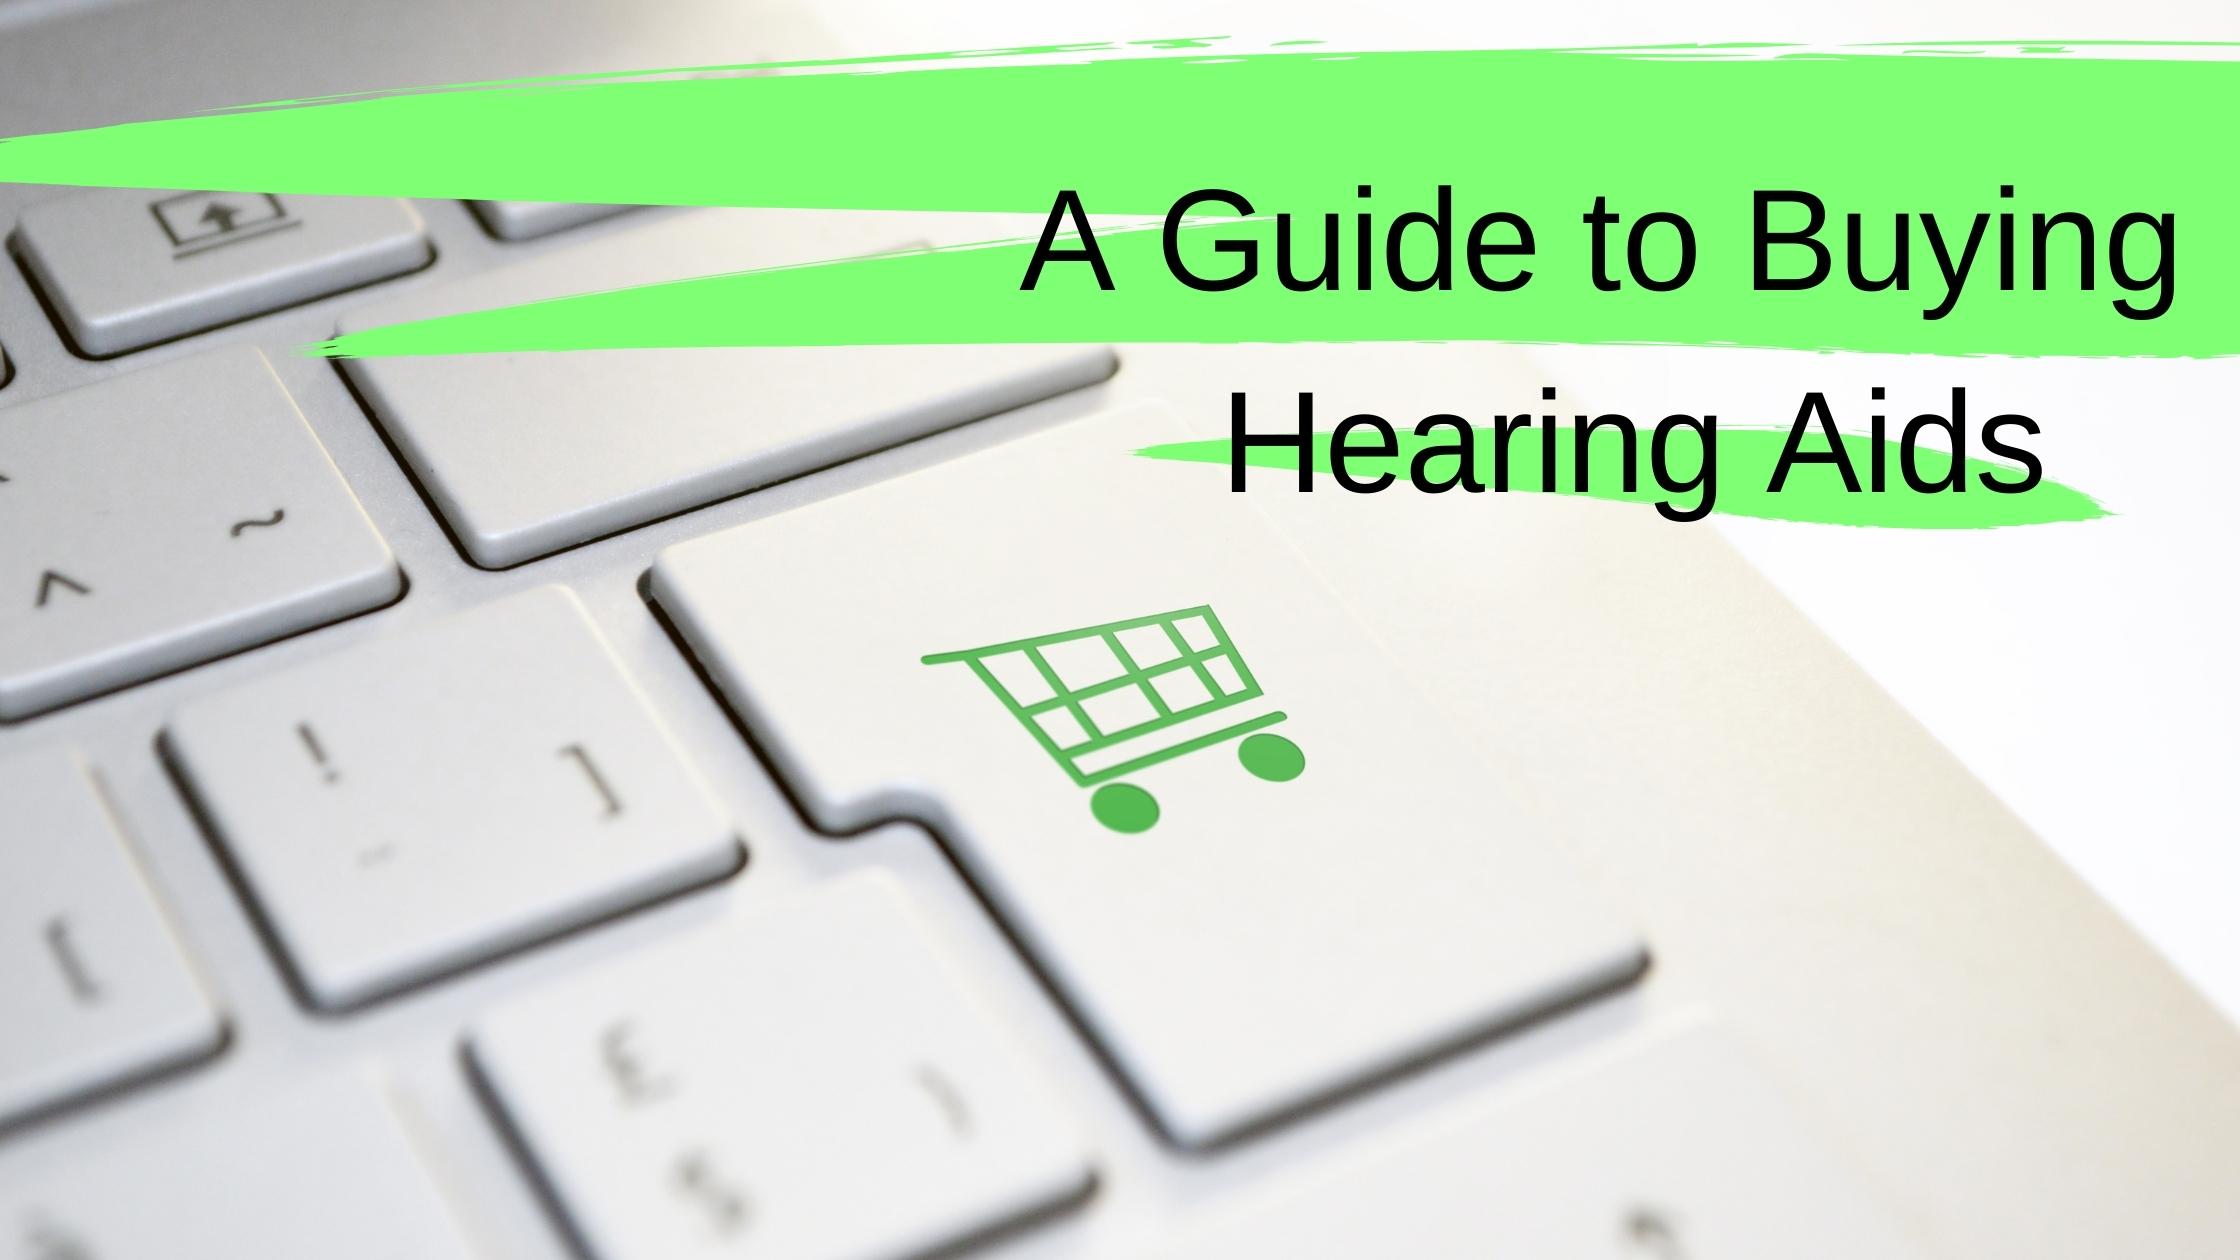 Featured image for “A Guide to Buying Hearing Aids”